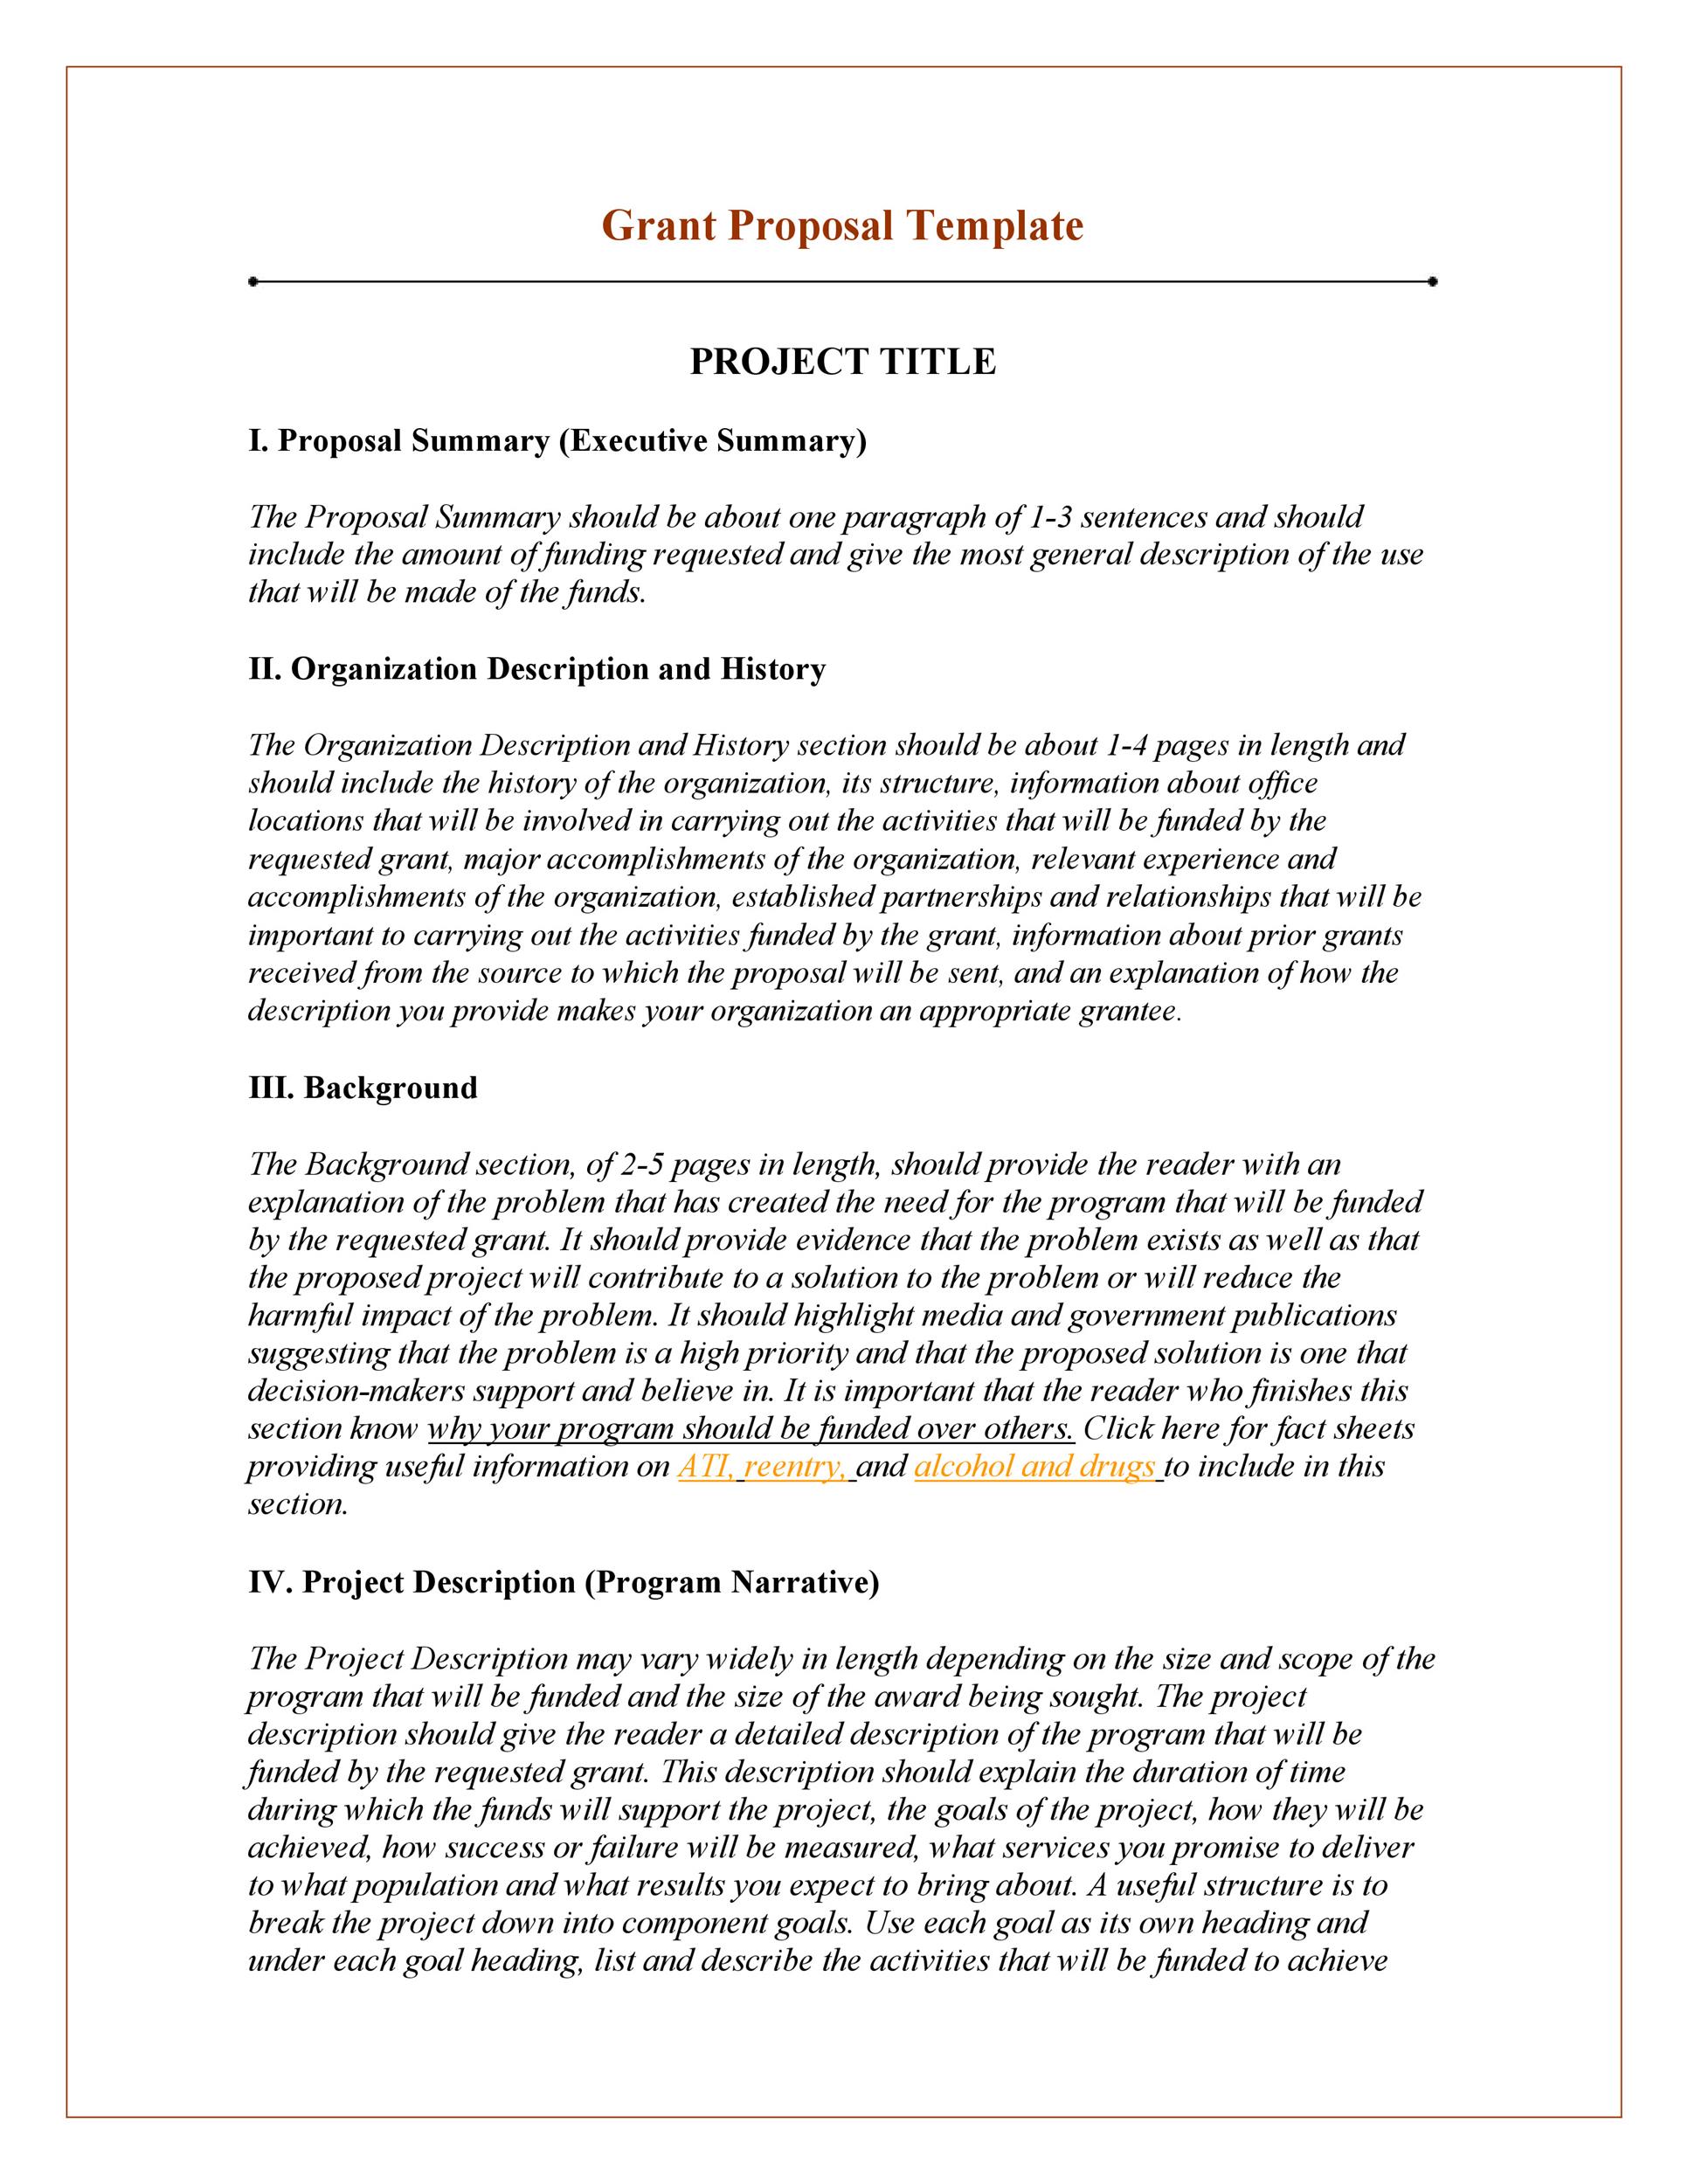 How Do You Write A Grant Proposal Template